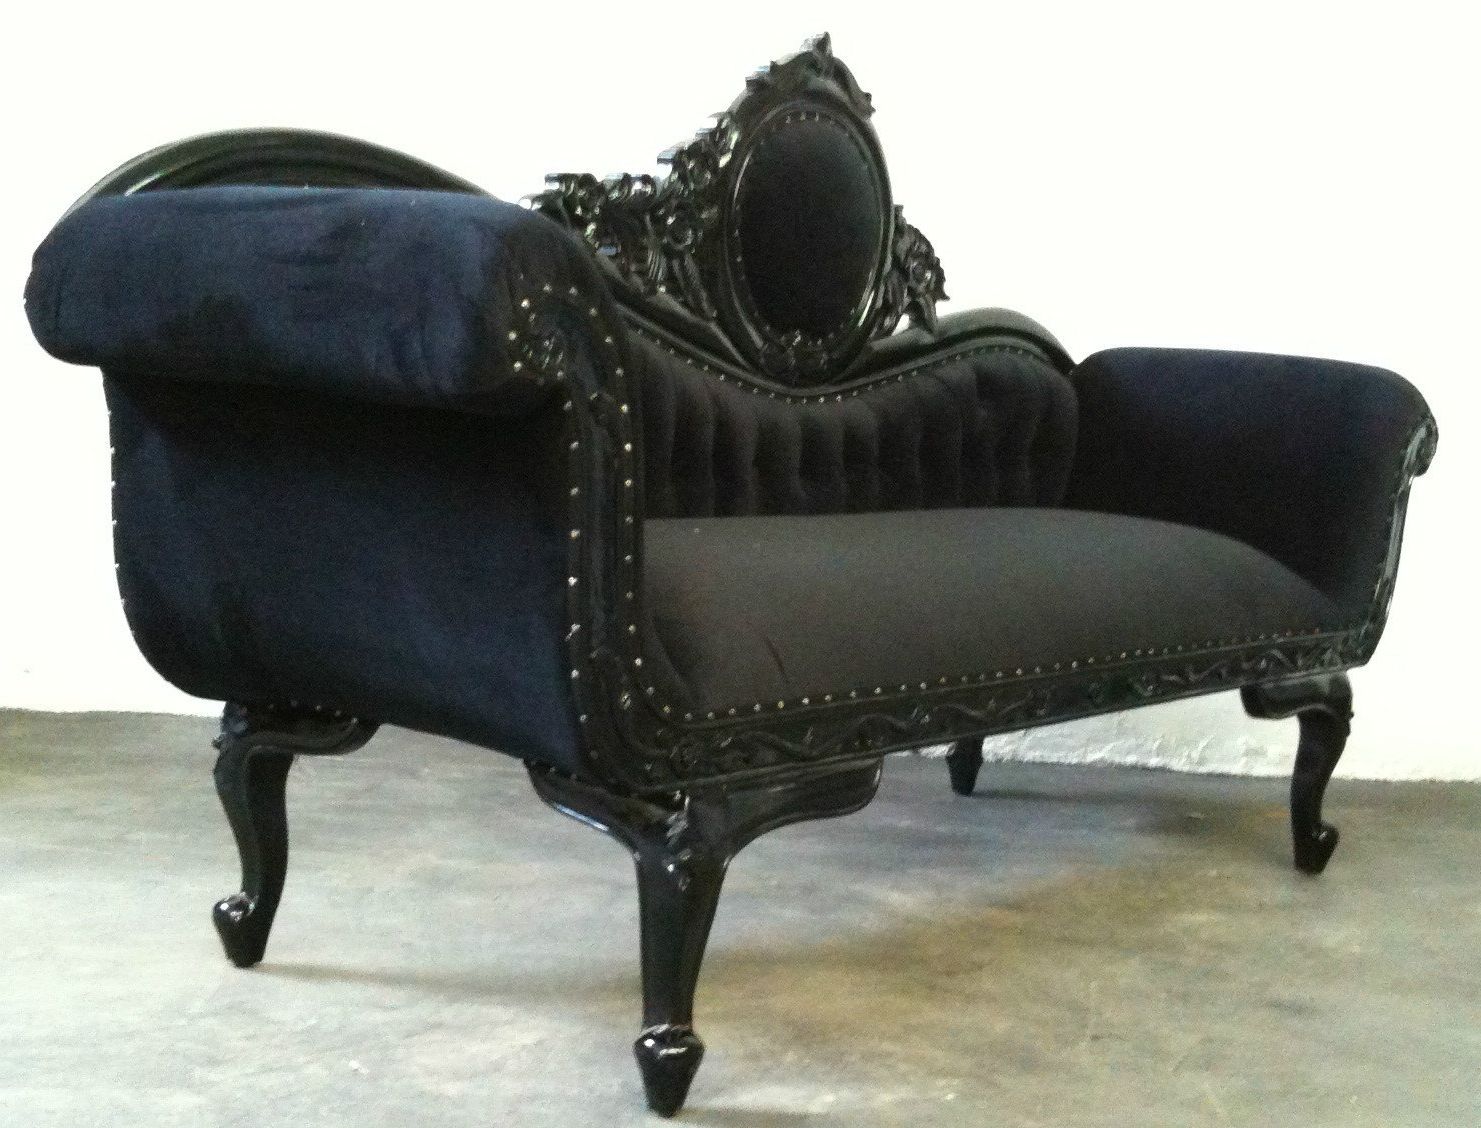 Unique Black Chaise Lounge — Awesome Homes : Perfect Black Chaise Regarding Current Black Chaises (View 7 of 15)